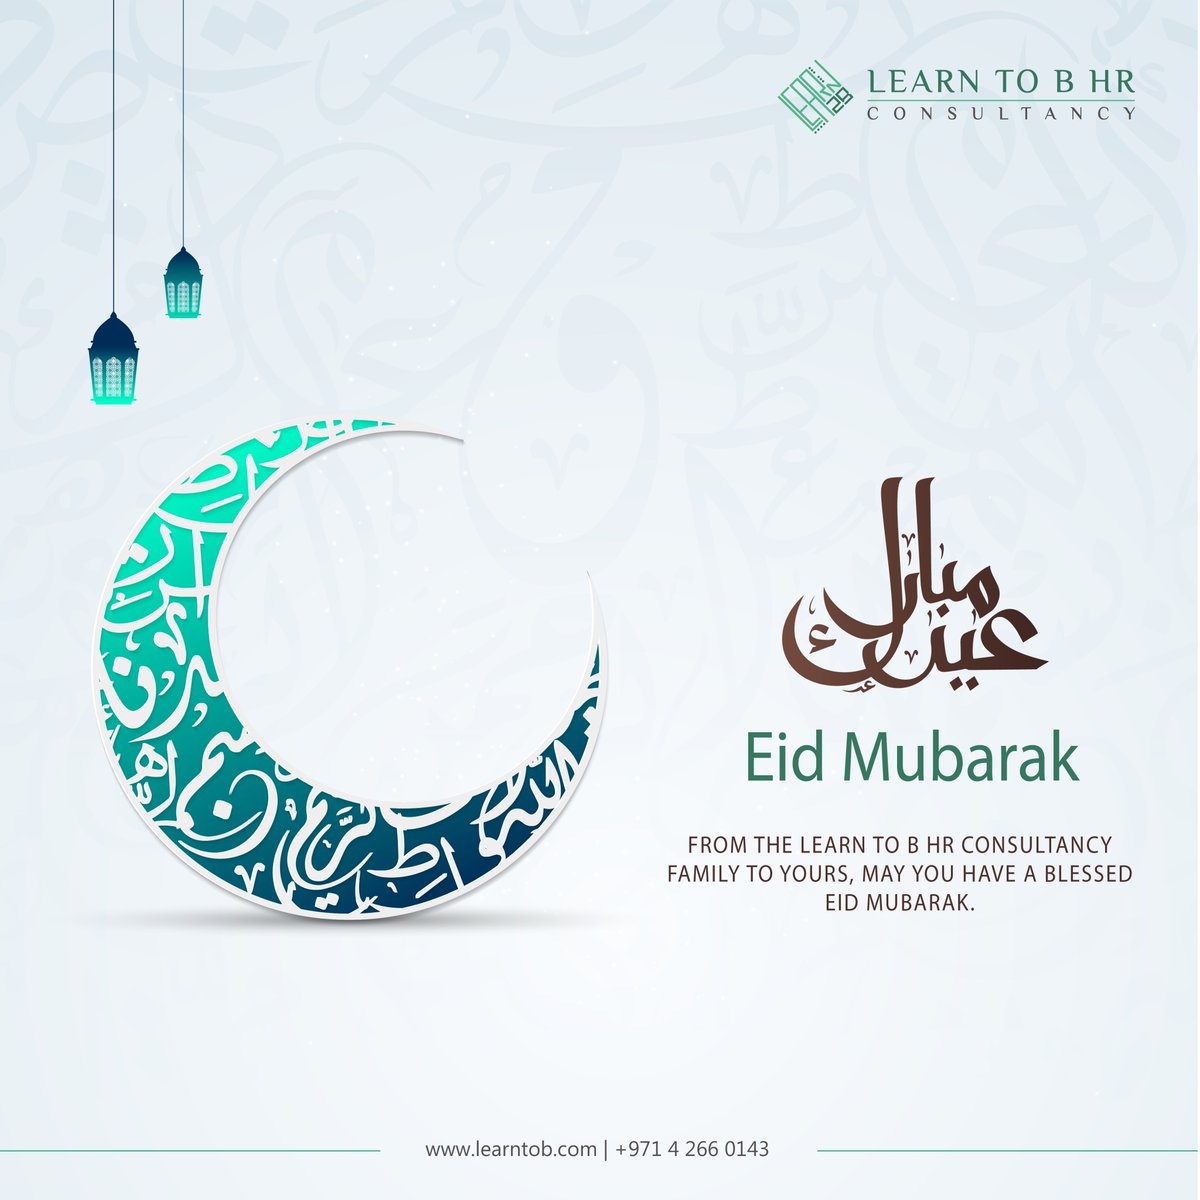 📷 Eid Mubarak! May this Eid bring you happiness, peace, and prosperity, and may all your prayers be answered.
#happyeidmubarak #eidmubarak #happyeid #learntob